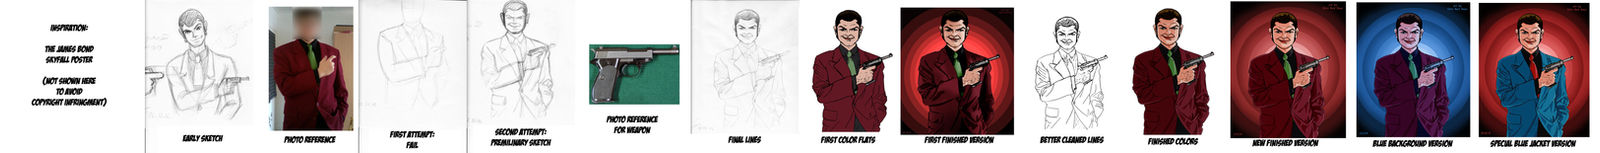 The Longuest WIP: Lupin III for the new year